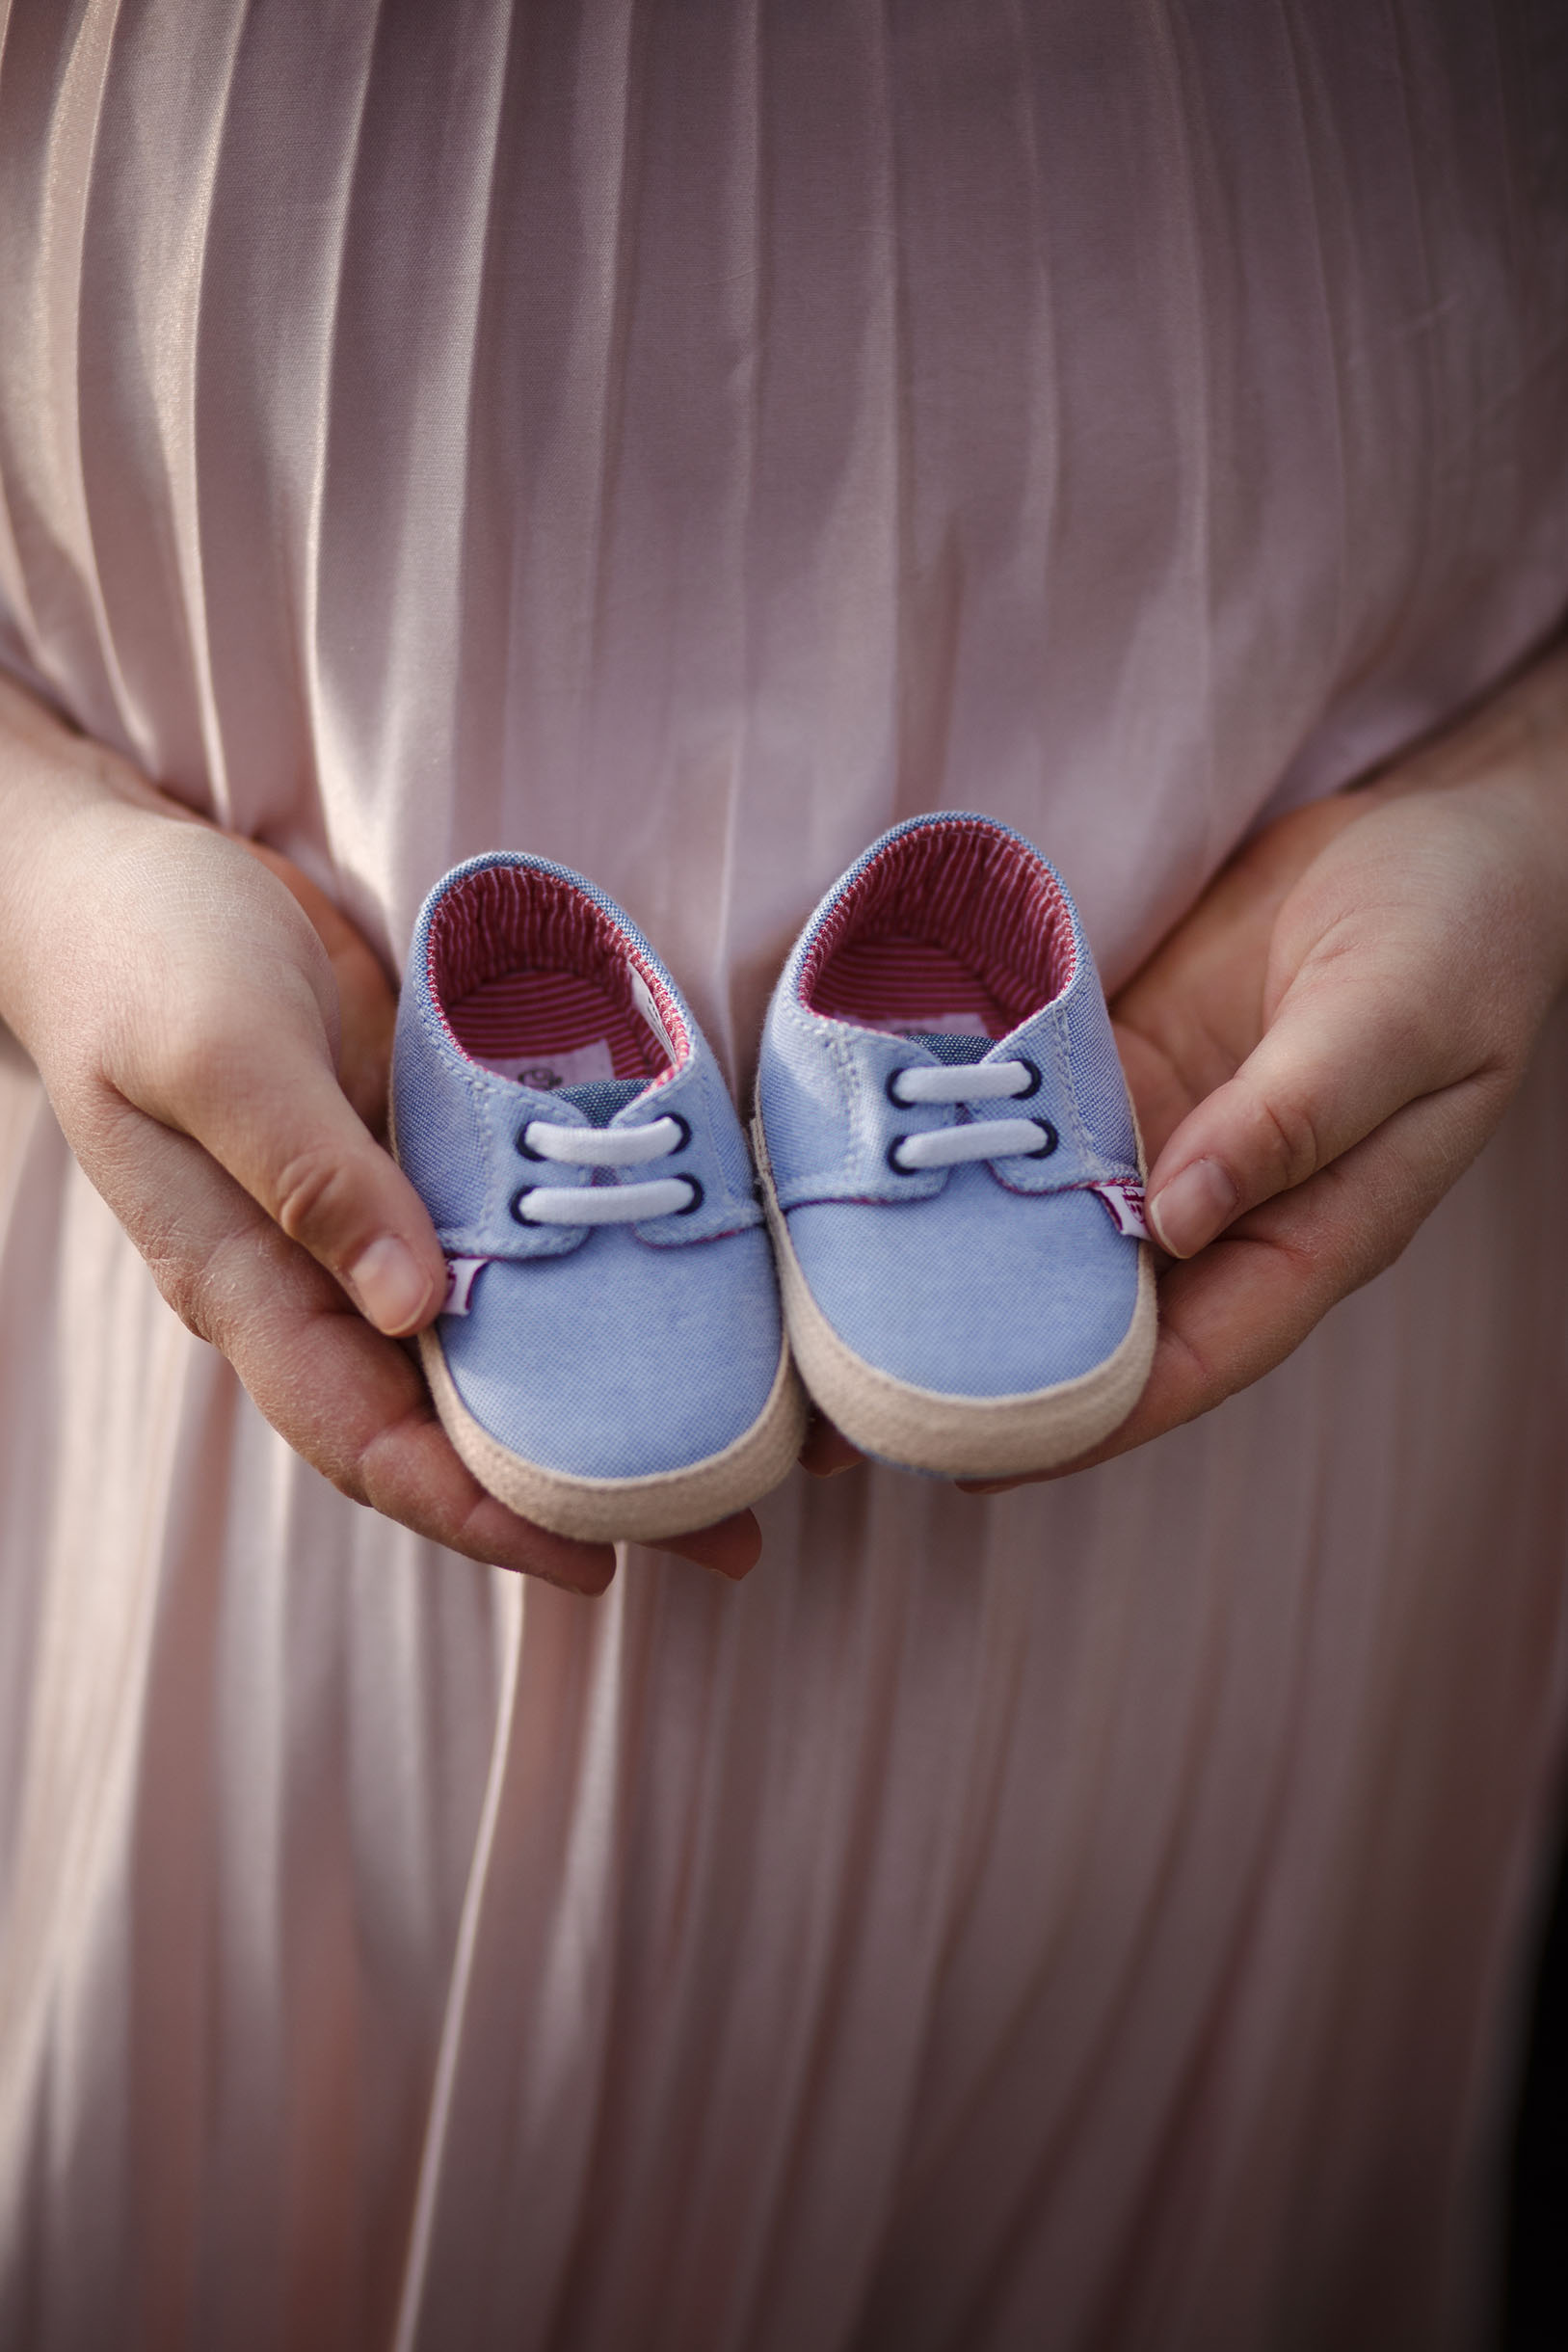 Pregnant woman holding her baby's shoes in her hands, close up shot for family photography.